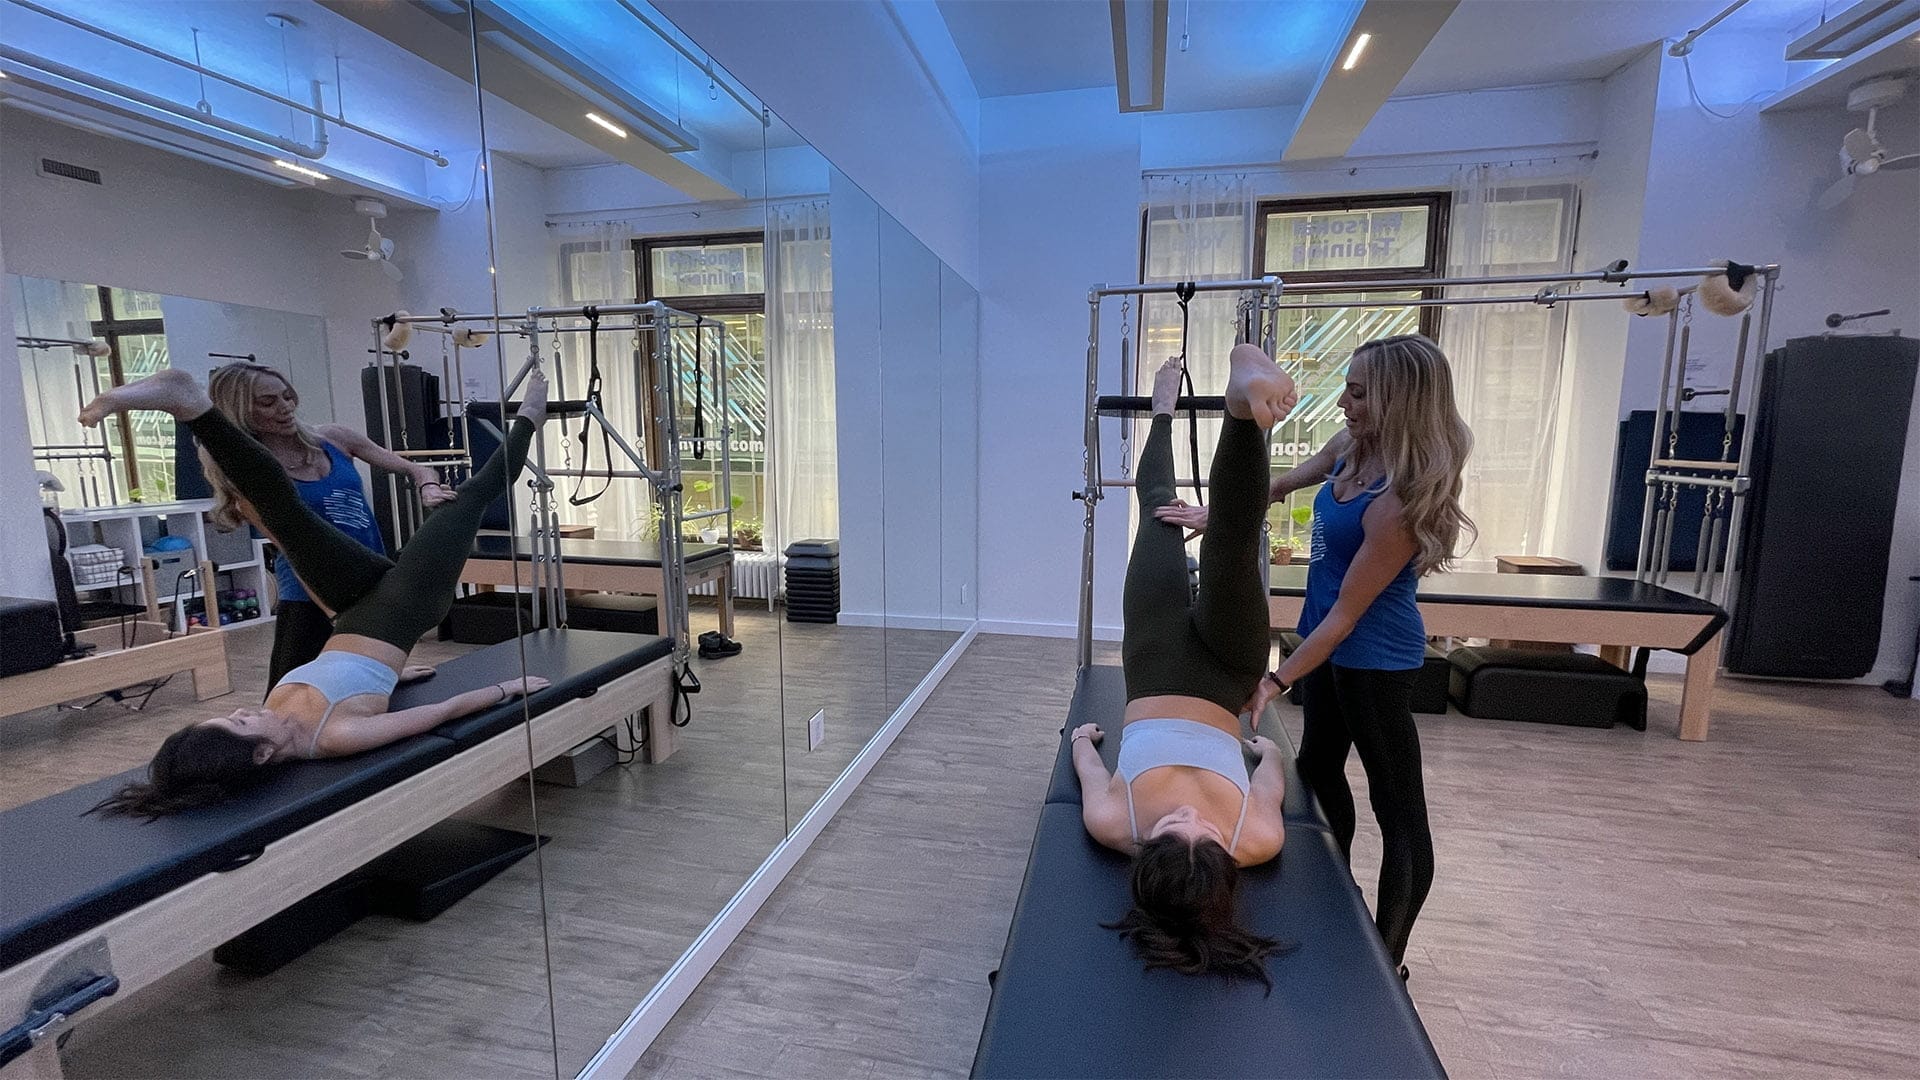 Christianne Tomao Pilates Movement and Wellness - New York - Book Online -  Prices, Reviews, Photos